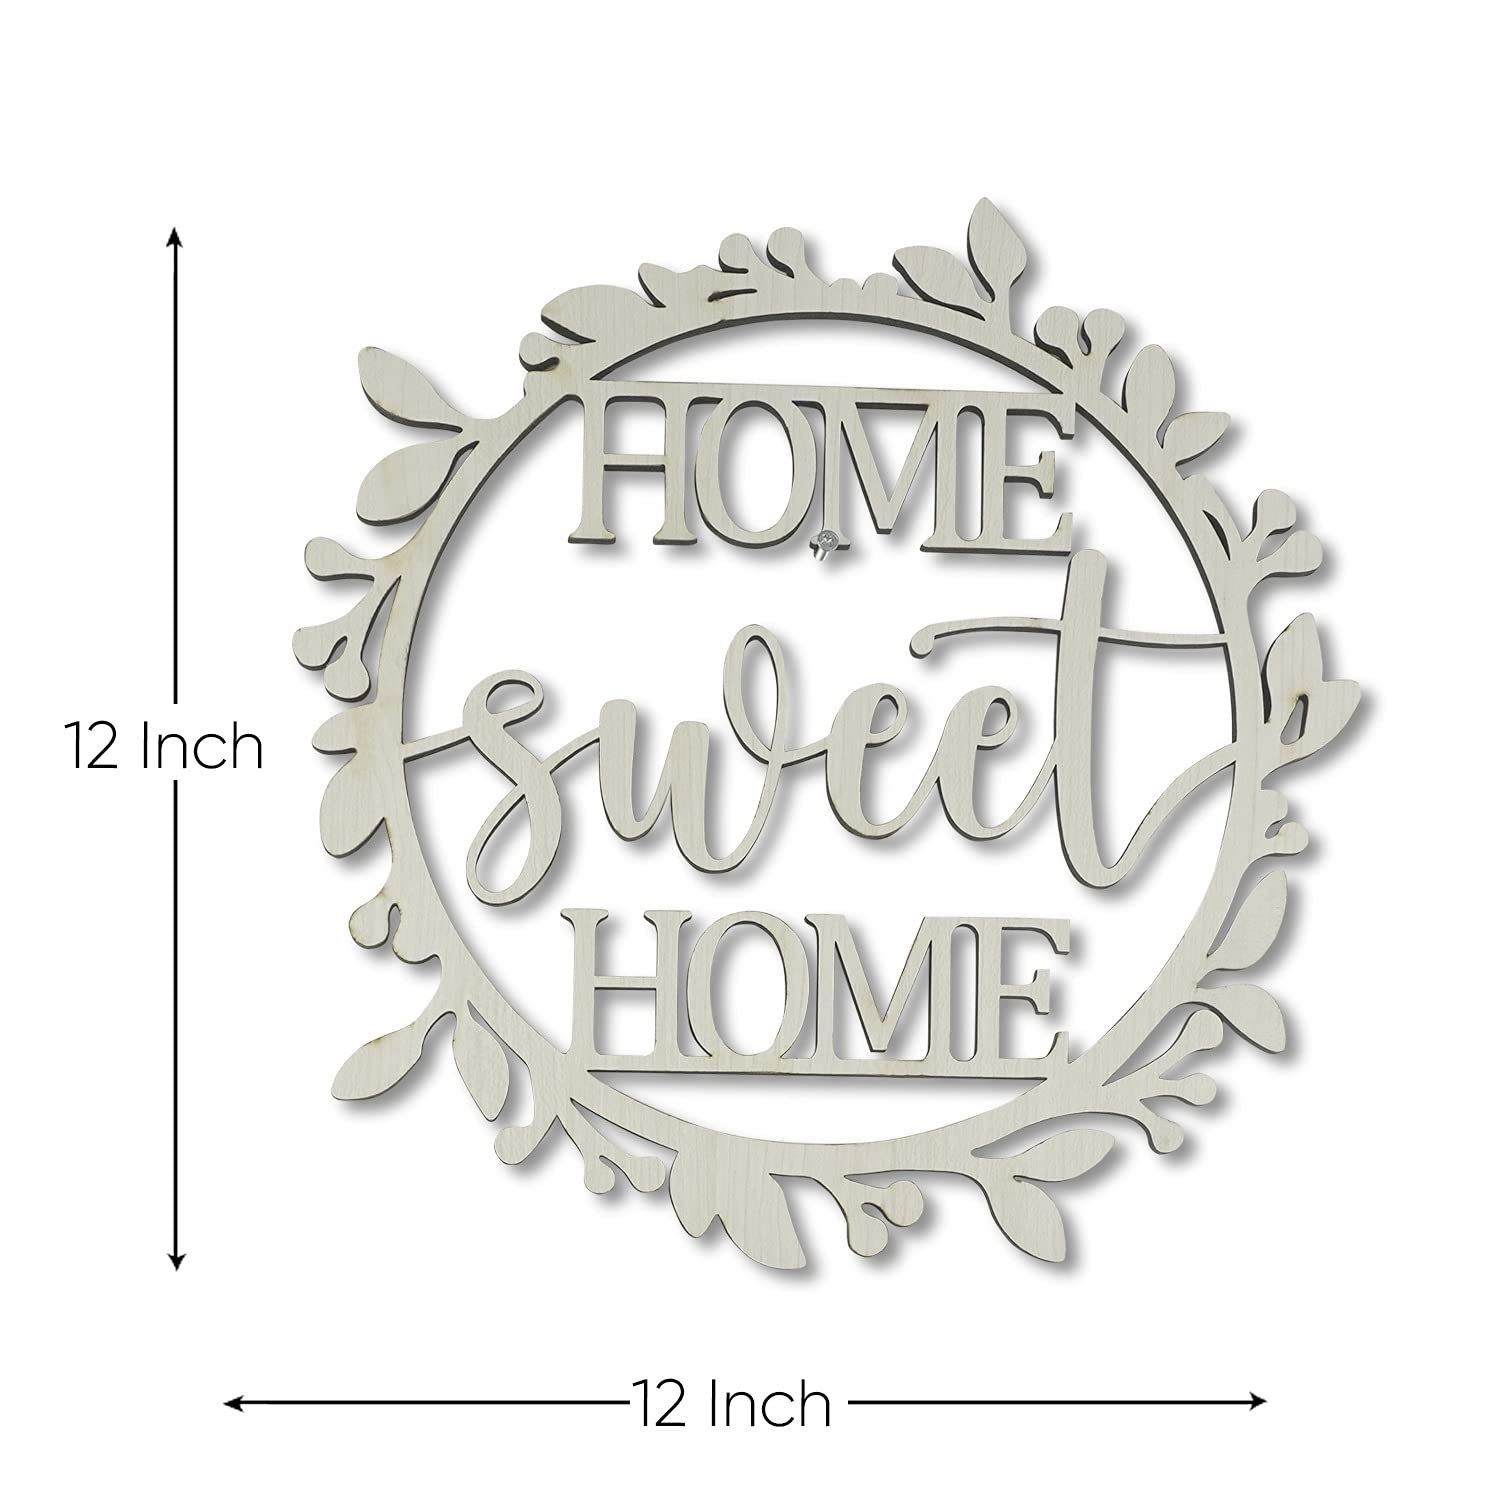 Sketchfab Welcome Name Plates Board Design for Home Villa Entrance Outdoor Hotels Outside House Decor Stylish